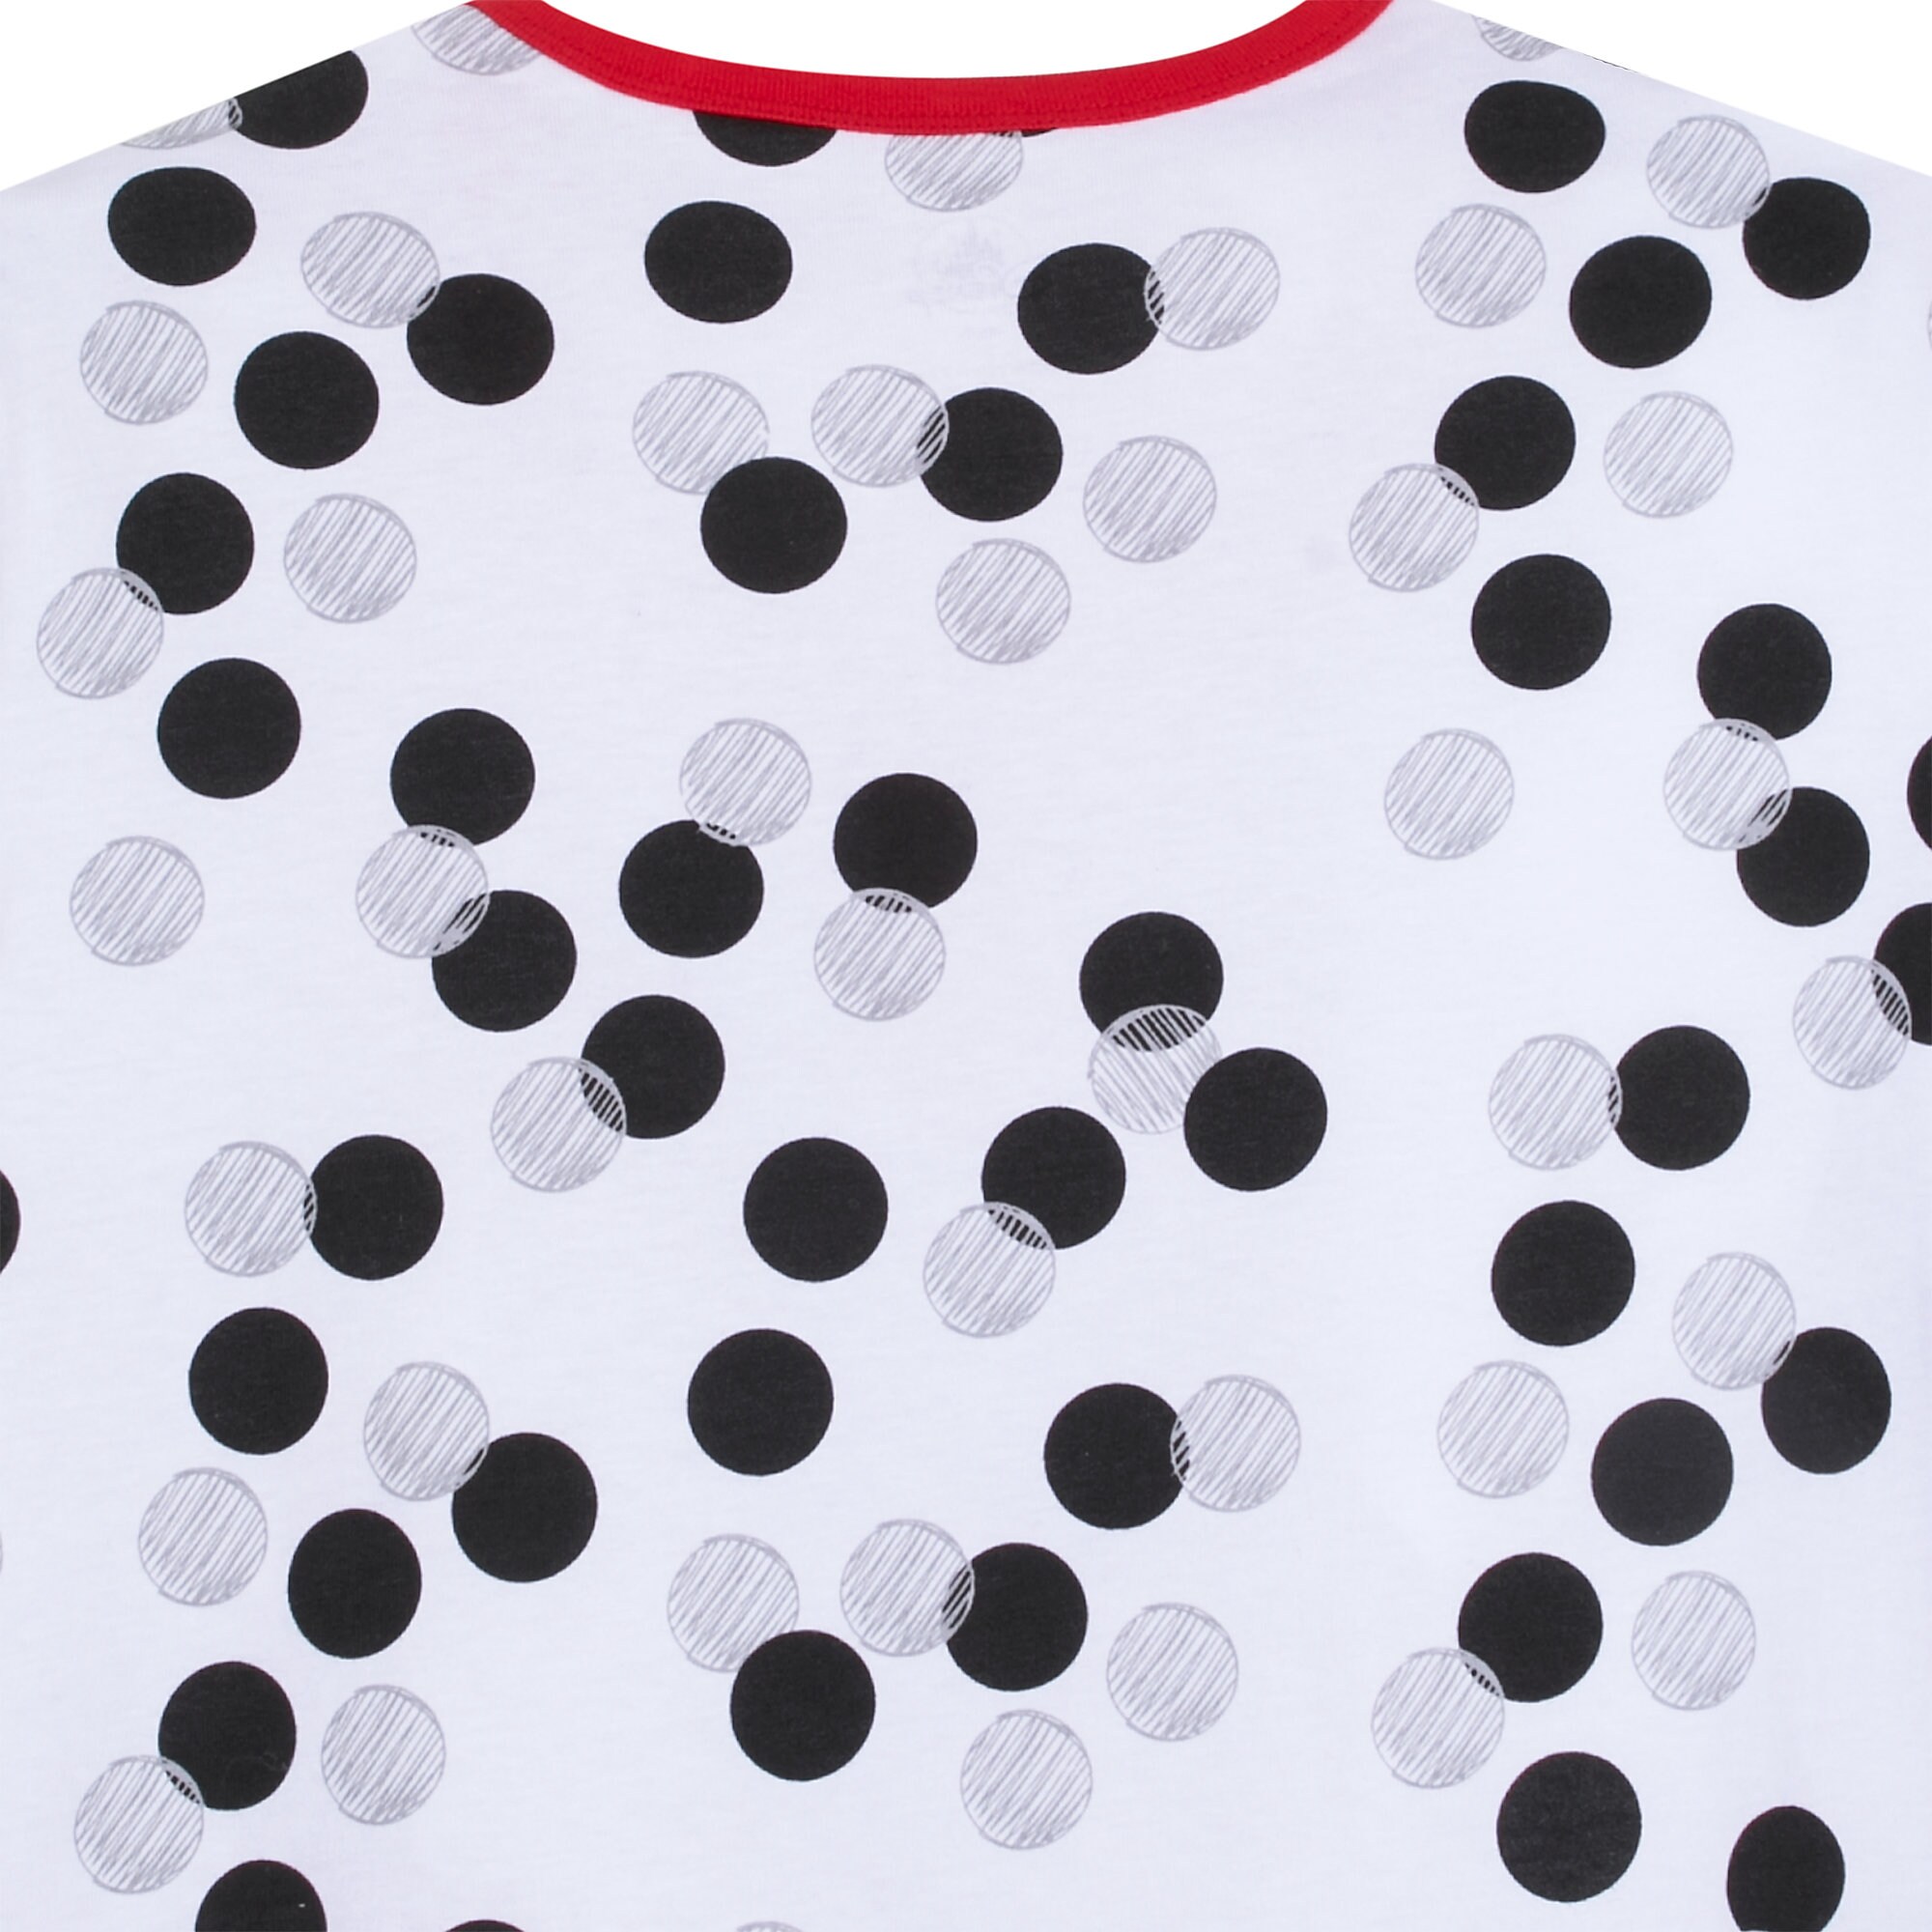 Minnie Mouse Polka Dot Nightshirt for Women